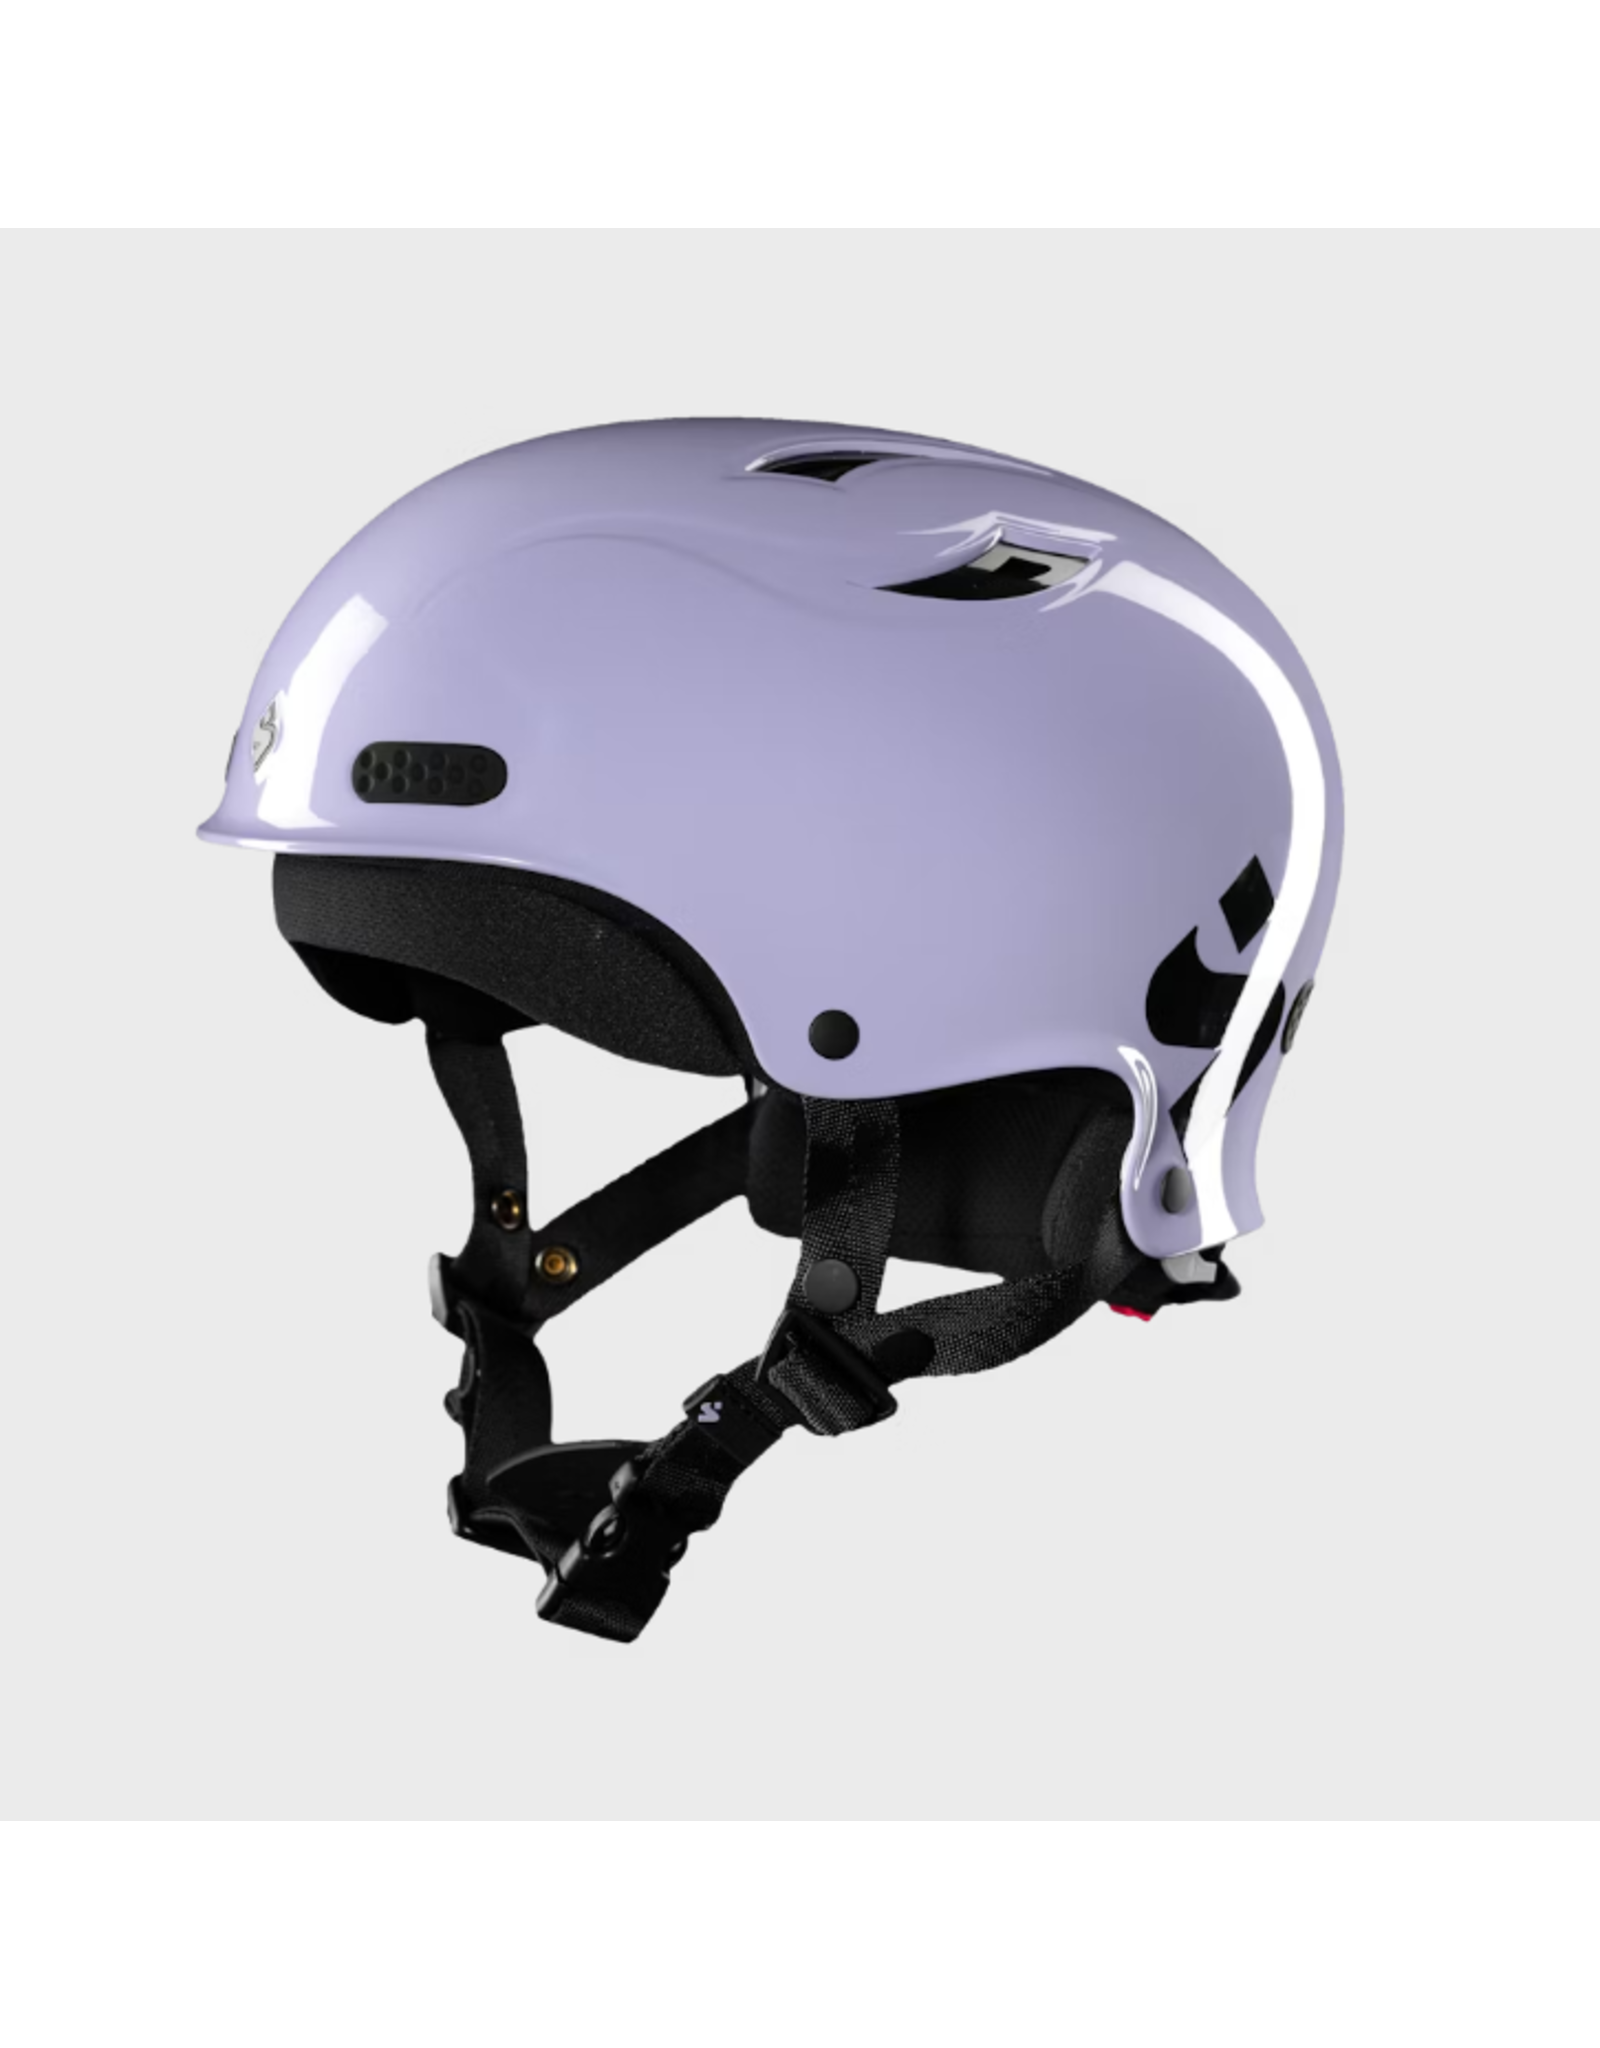 Sweet Protection Sweet Protection Casque Wanderer